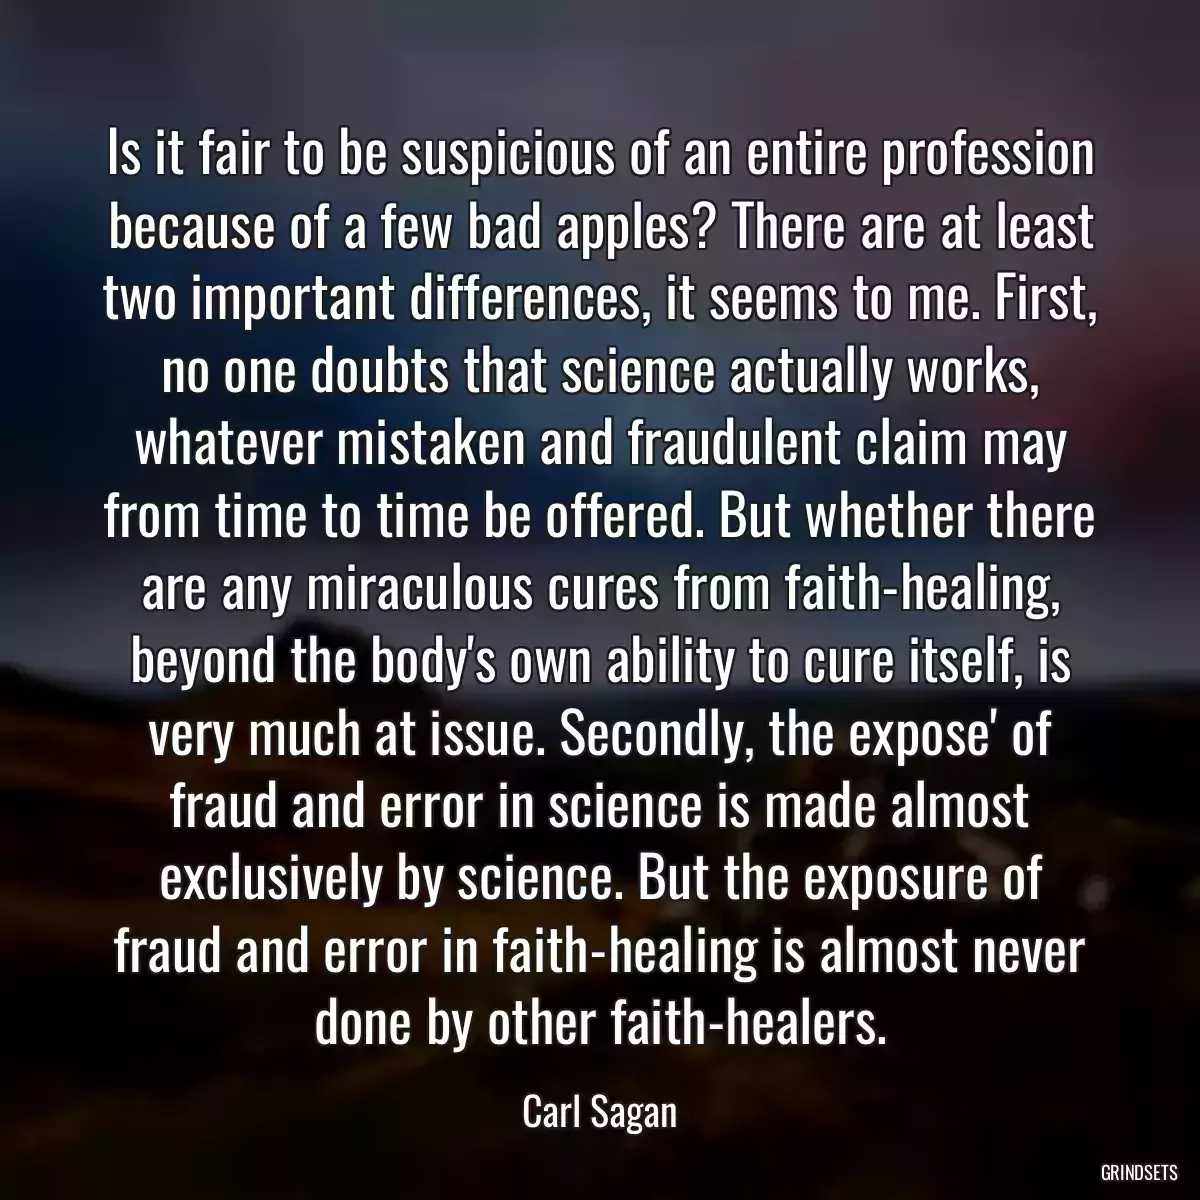 Is it fair to be suspicious of an entire profession because of a few bad apples? There are at least two important differences, it seems to me. First, no one doubts that science actually works, whatever mistaken and fraudulent claim may from time to time be offered. But whether there are any miraculous cures from faith-healing, beyond the body\'s own ability to cure itself, is very much at issue. Secondly, the expose\' of fraud and error in science is made almost exclusively by science. But the exposure of fraud and error in faith-healing is almost never done by other faith-healers.